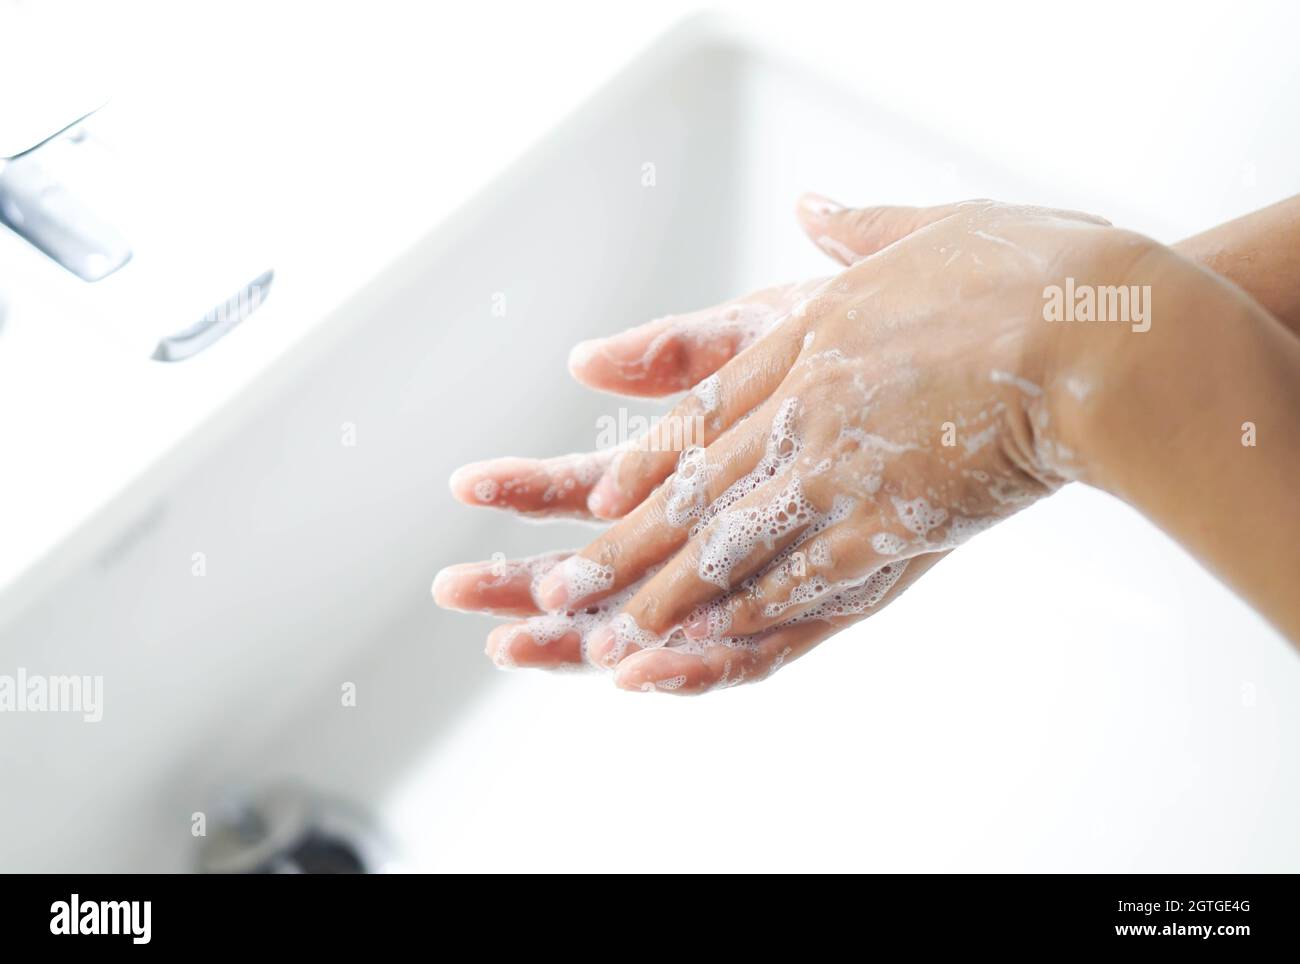 Cropped Image Of Woman Washing Hands In Sink At Bathroom Stock Photo